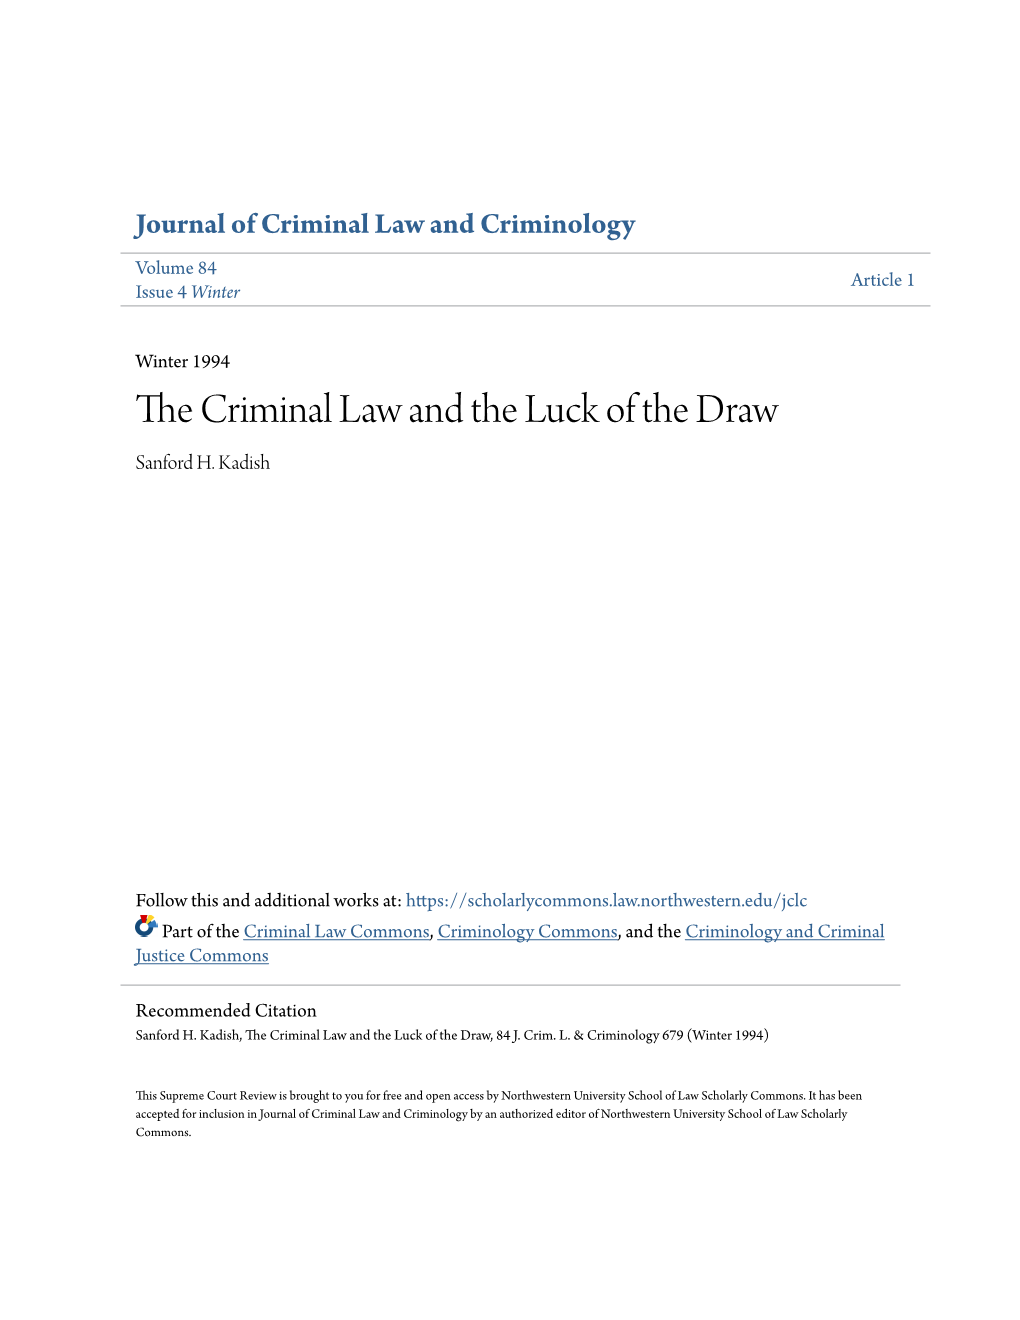 The Criminal Law and the Luck of the Draw*